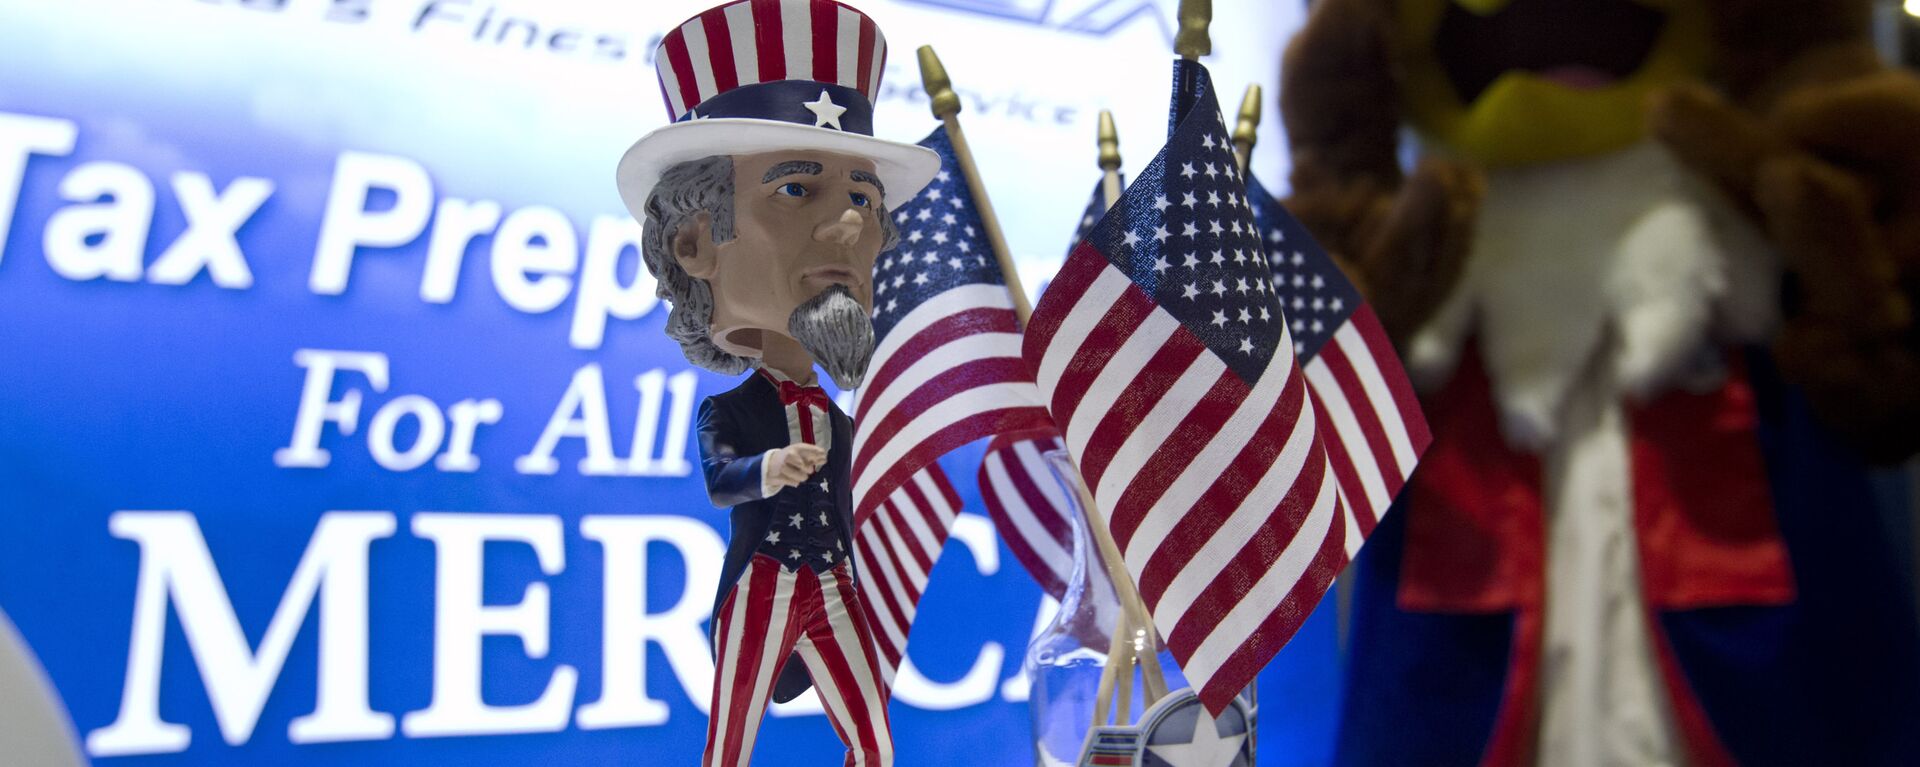 An Uncle Sam bubblehead decorates a booth during the Conservative Political Action Conference, CPAC 2019, in Oxon Hill, Md., Friday, March 1, 2019. - Sputnik International, 1920, 23.03.2024